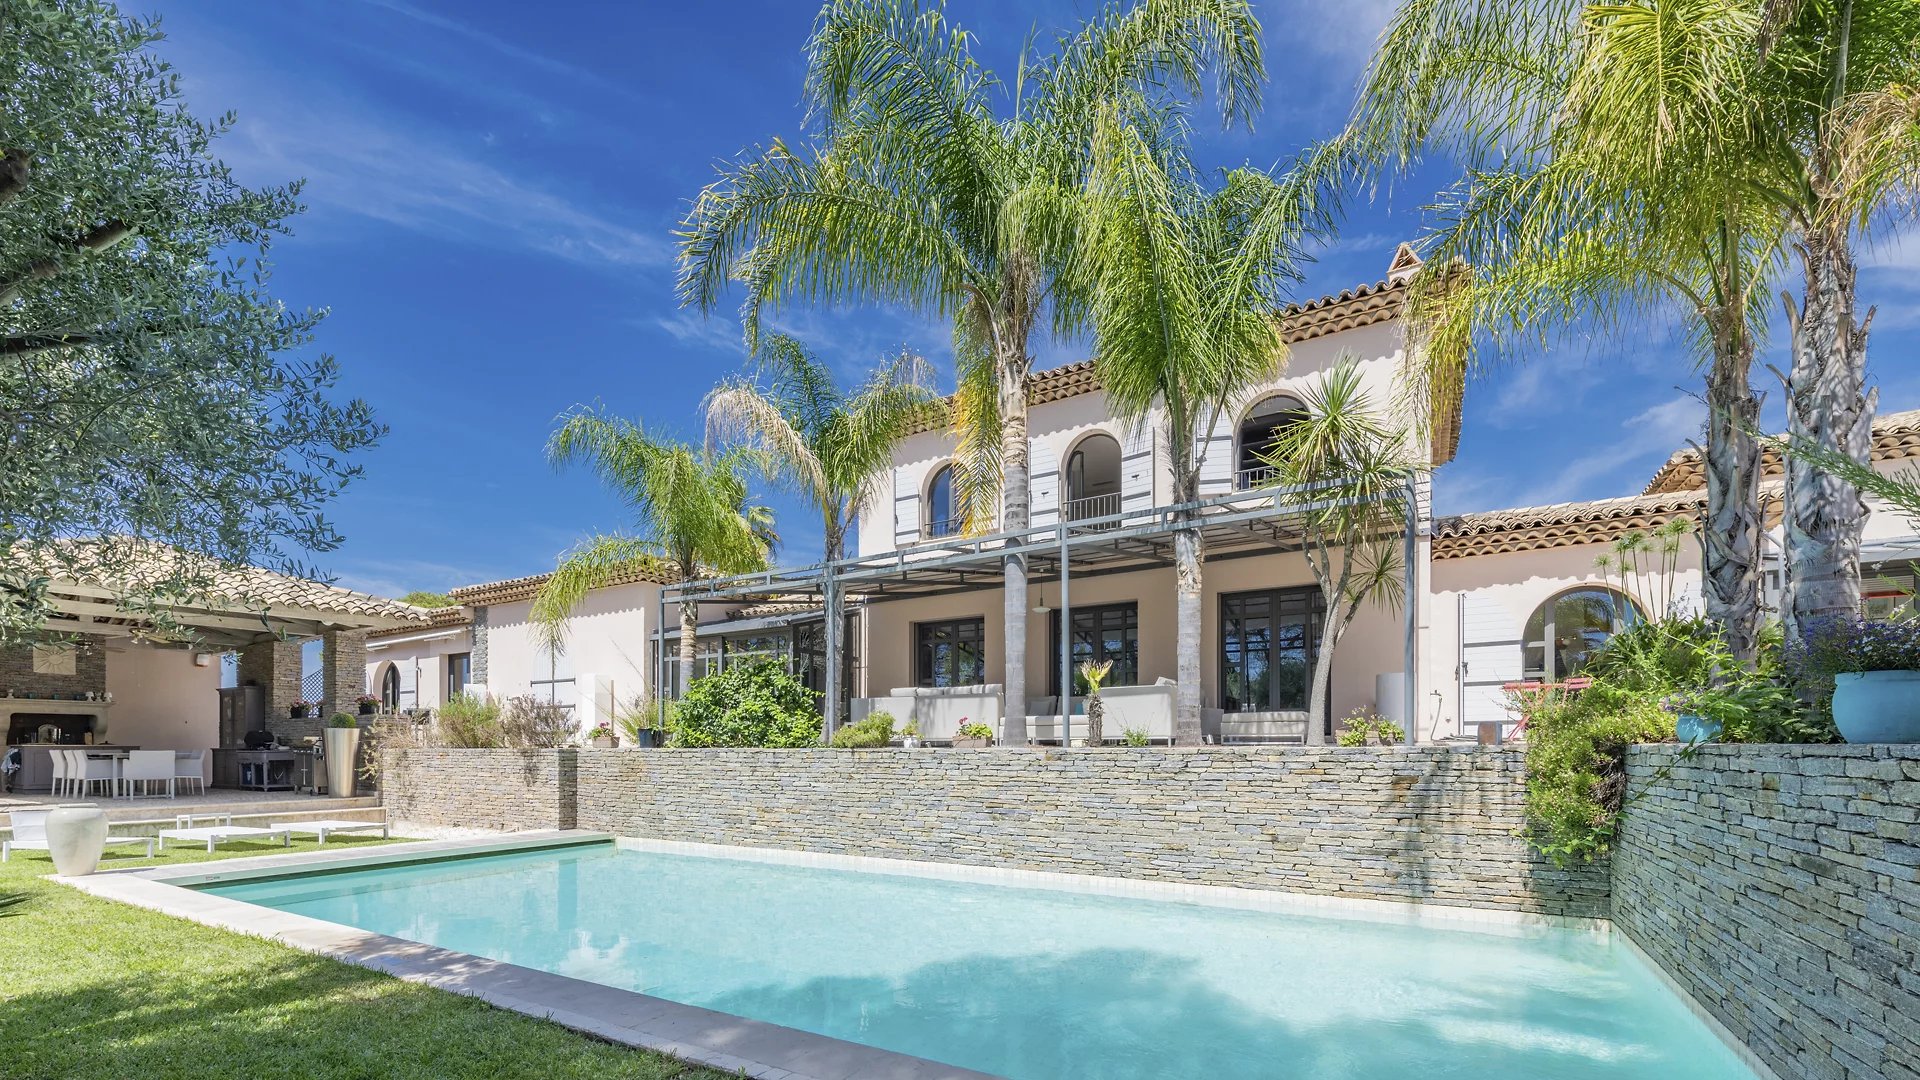 LUXURY VILLA WITH POOL IN A PRIVATE DOMAIN AT SAINT RAPHAEL